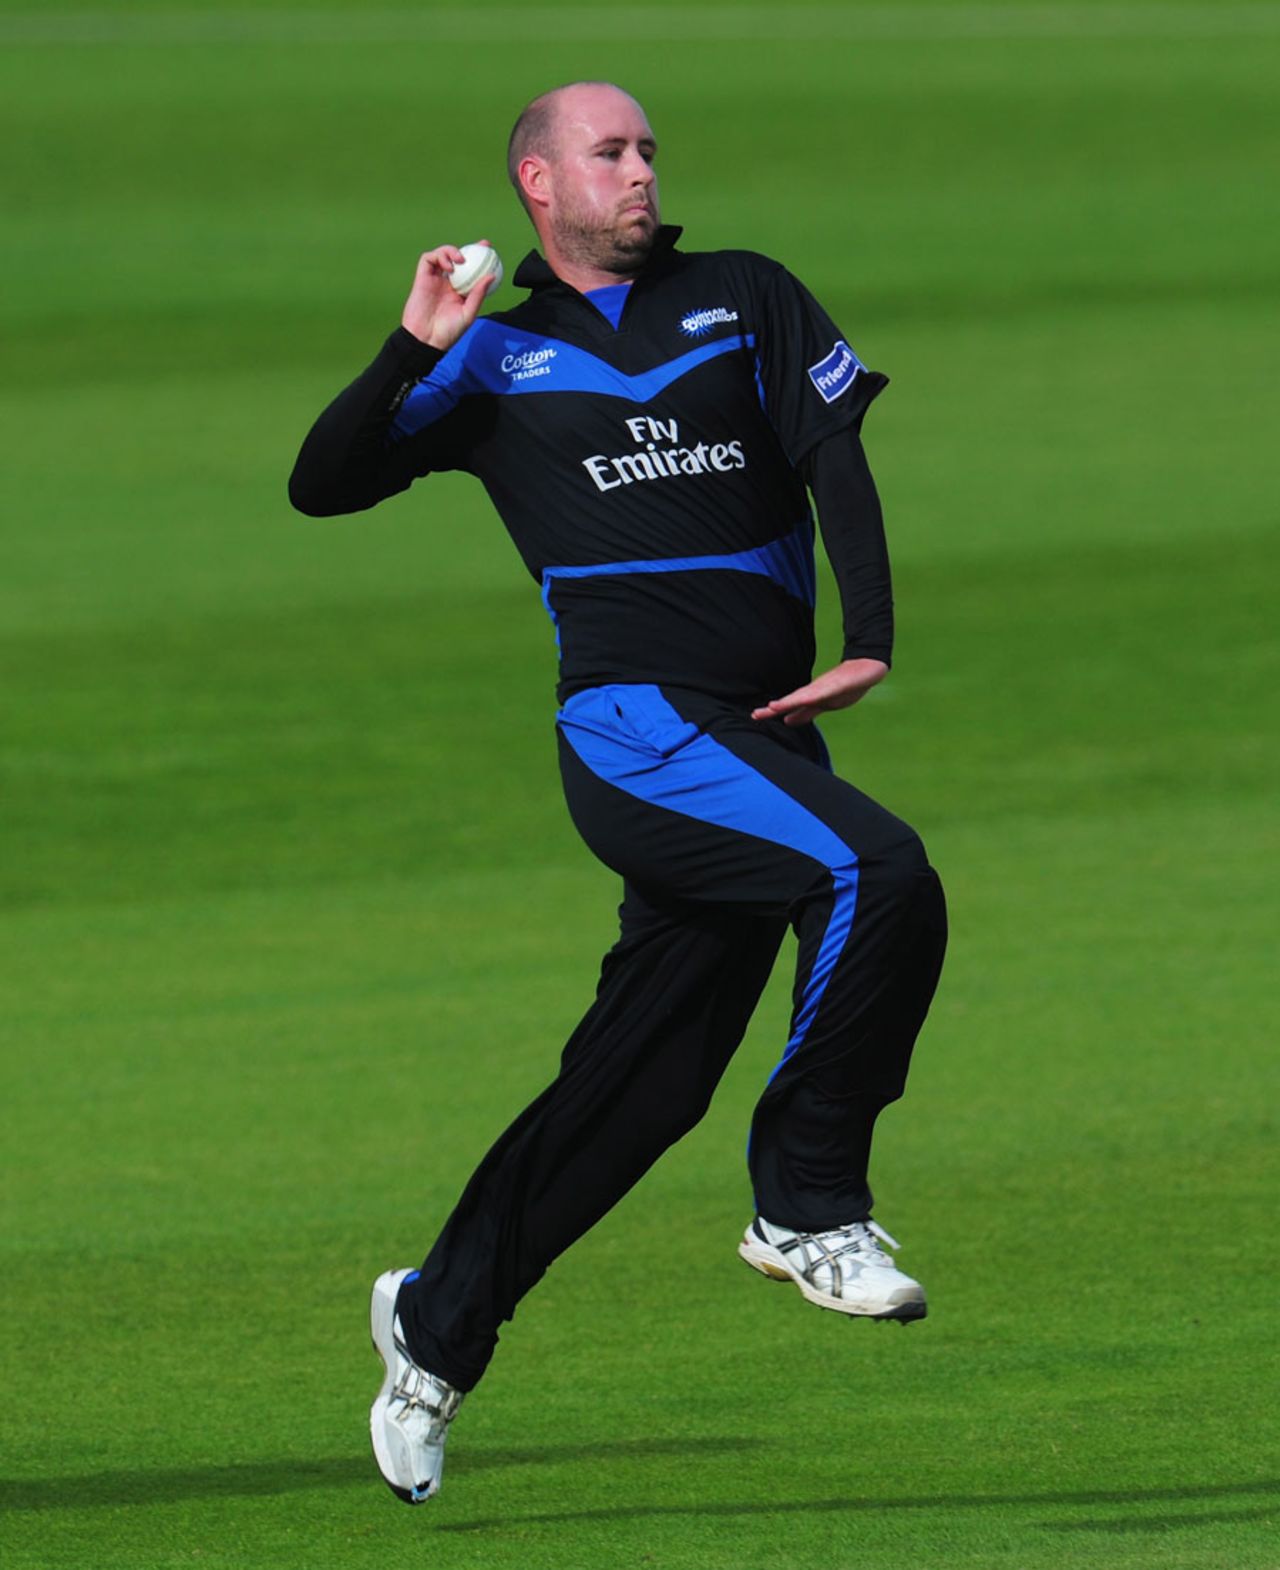 Chris Rushworth's four overs cost 25, Durham v Lancashire, FLt20 North Group, Chester-le-Street, June 28, 2013